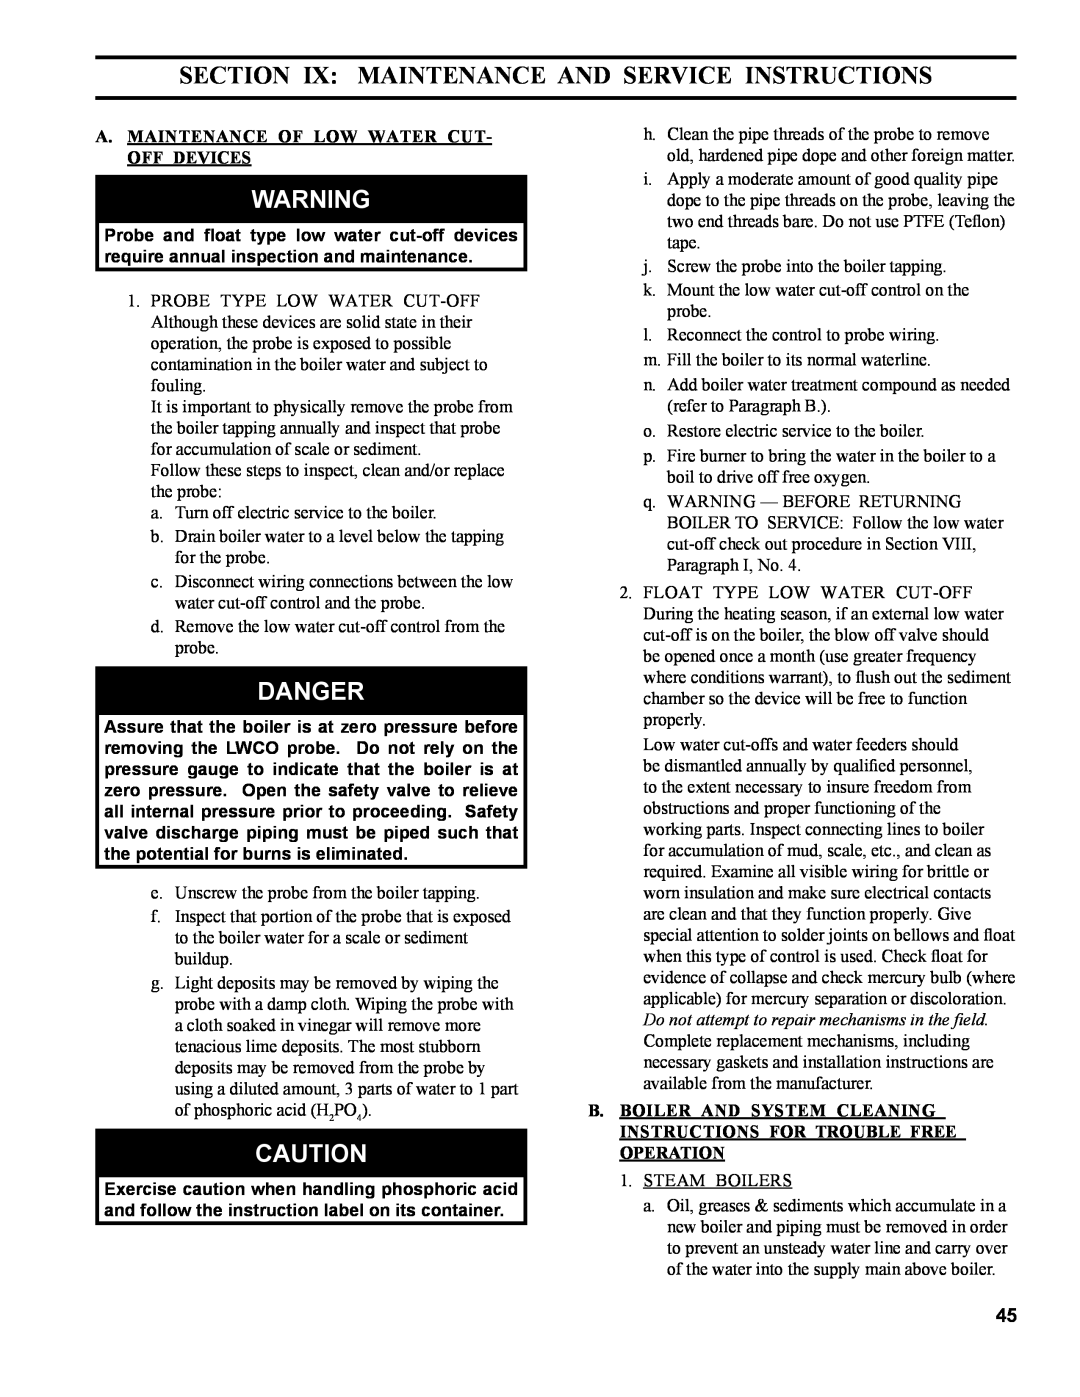 Burnham MST396 manual SECTION Ix MAINTENANCE AND SERVICE INSTRUCTIONS, Danger, A. Maintenance Of Low Water Cut- Off Devices 